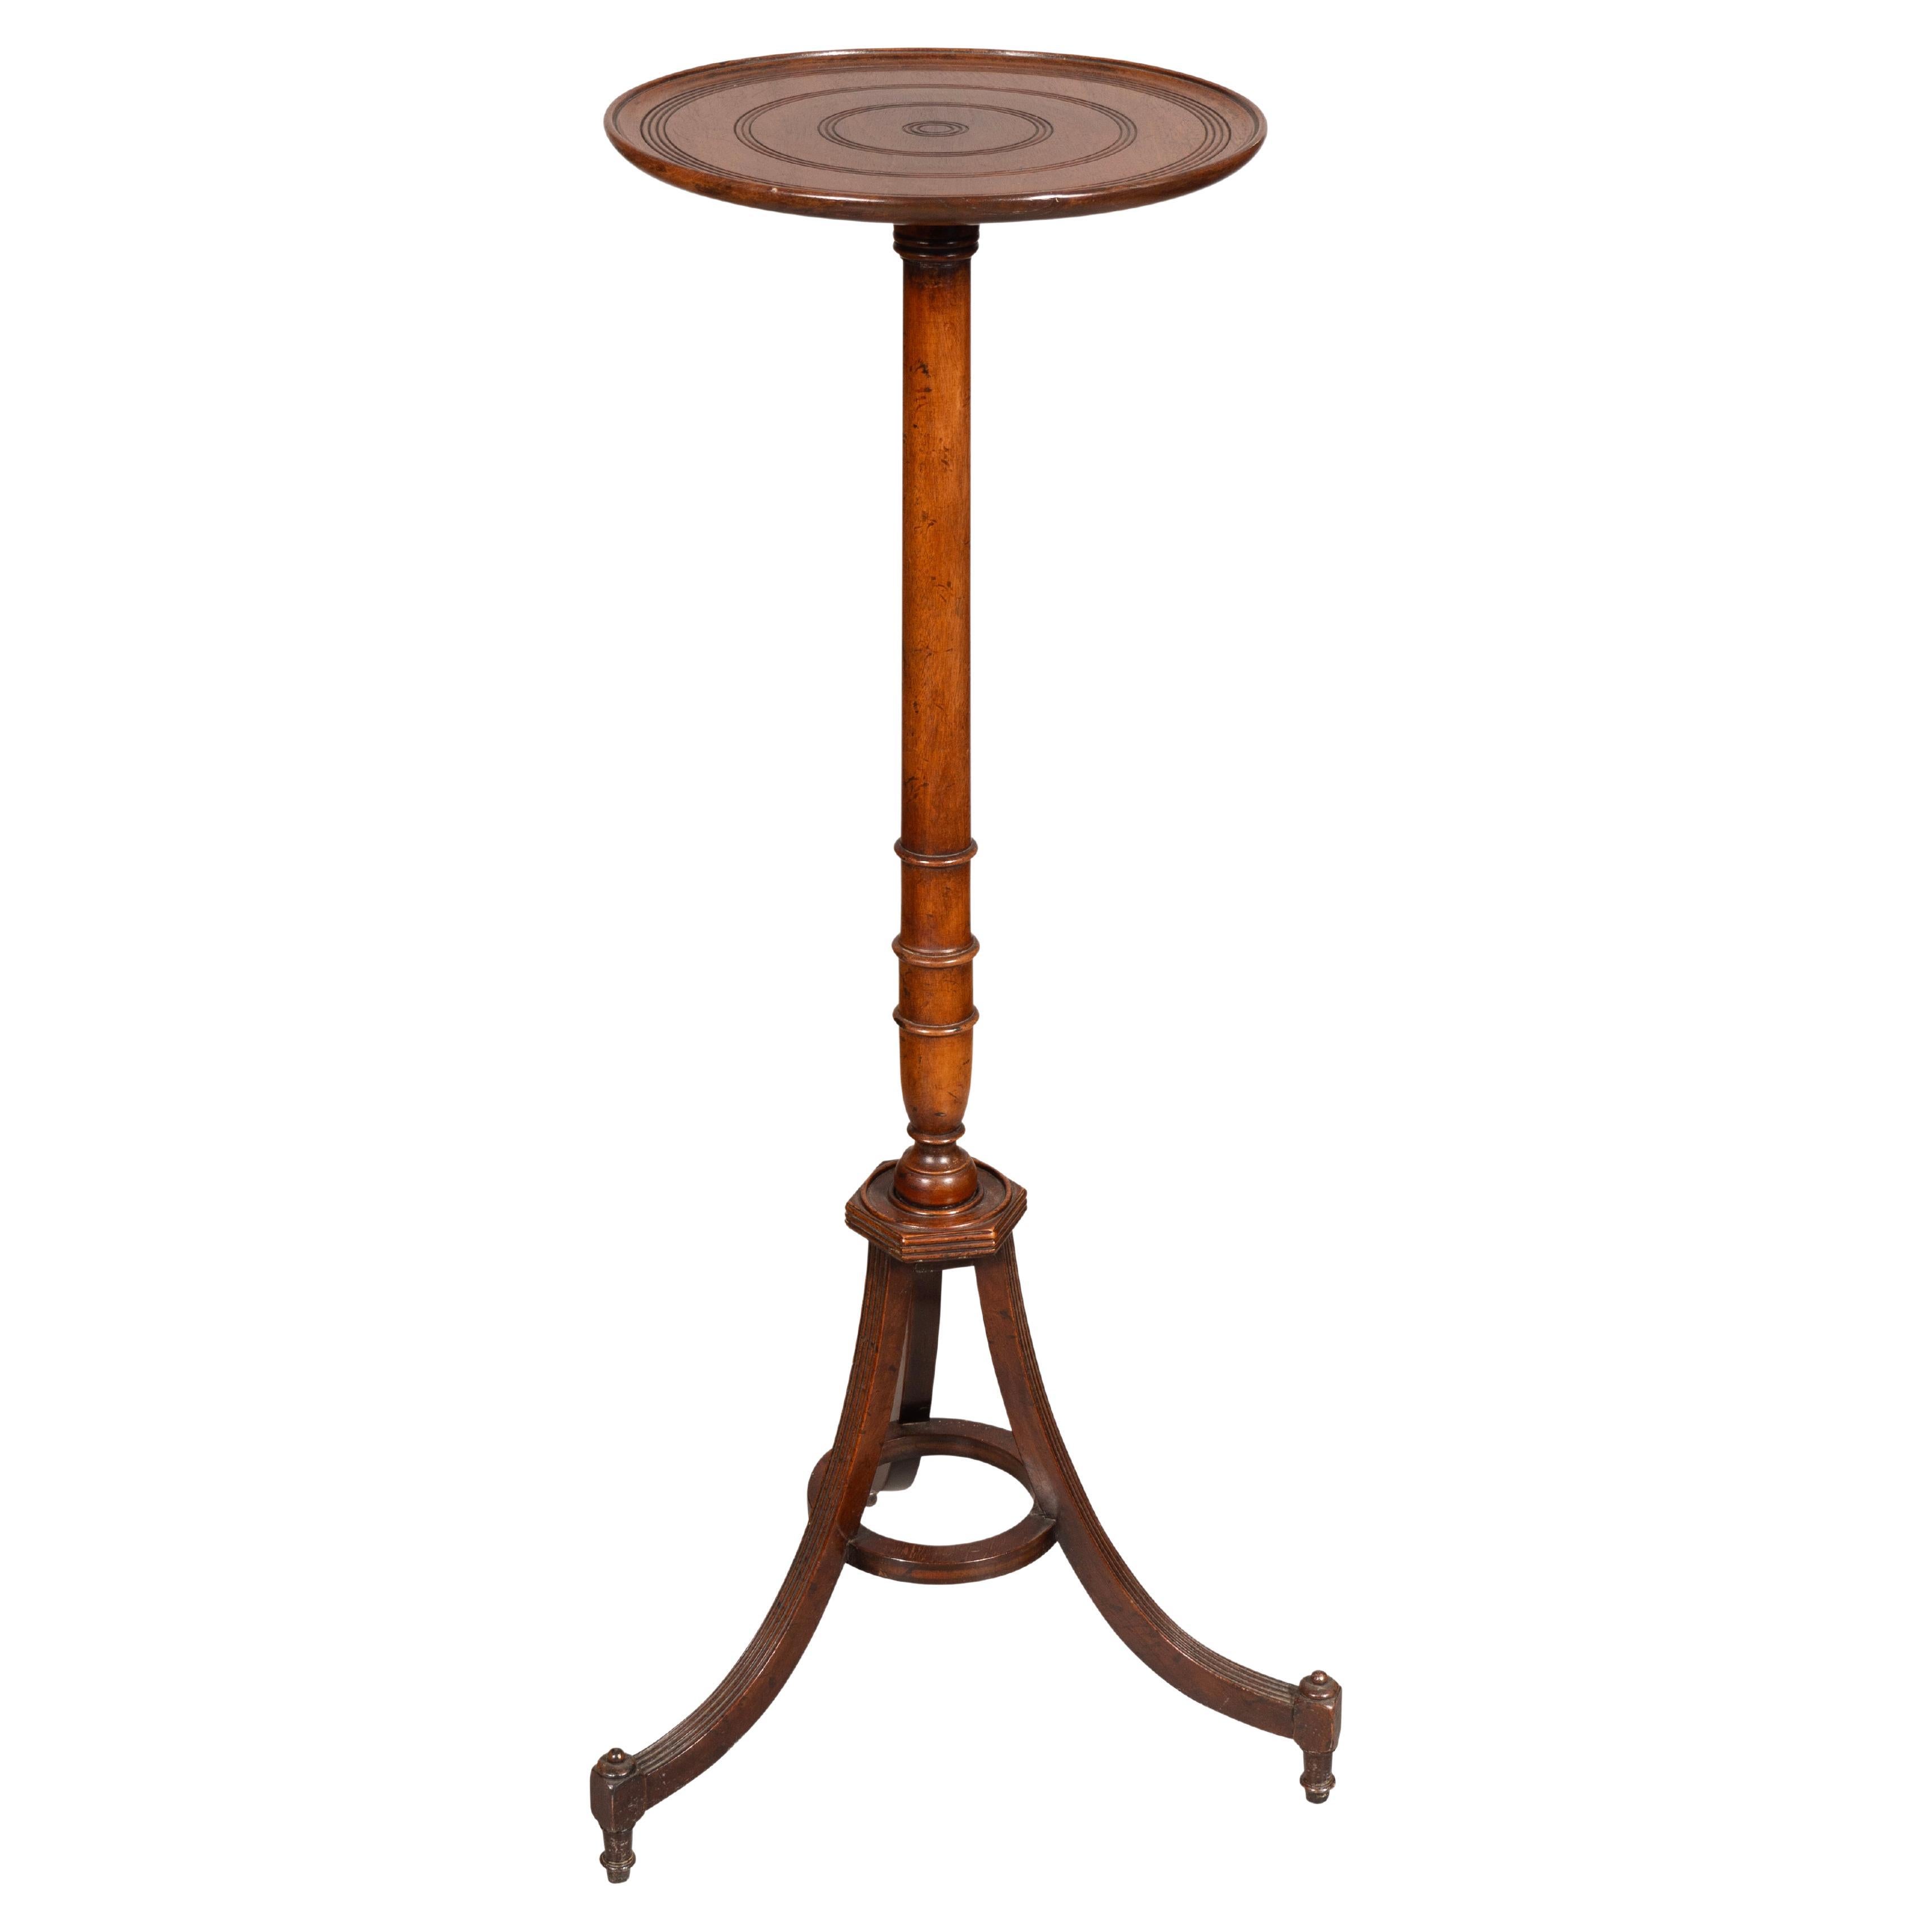 Regency Style Mahogany Fern Stand For Sale